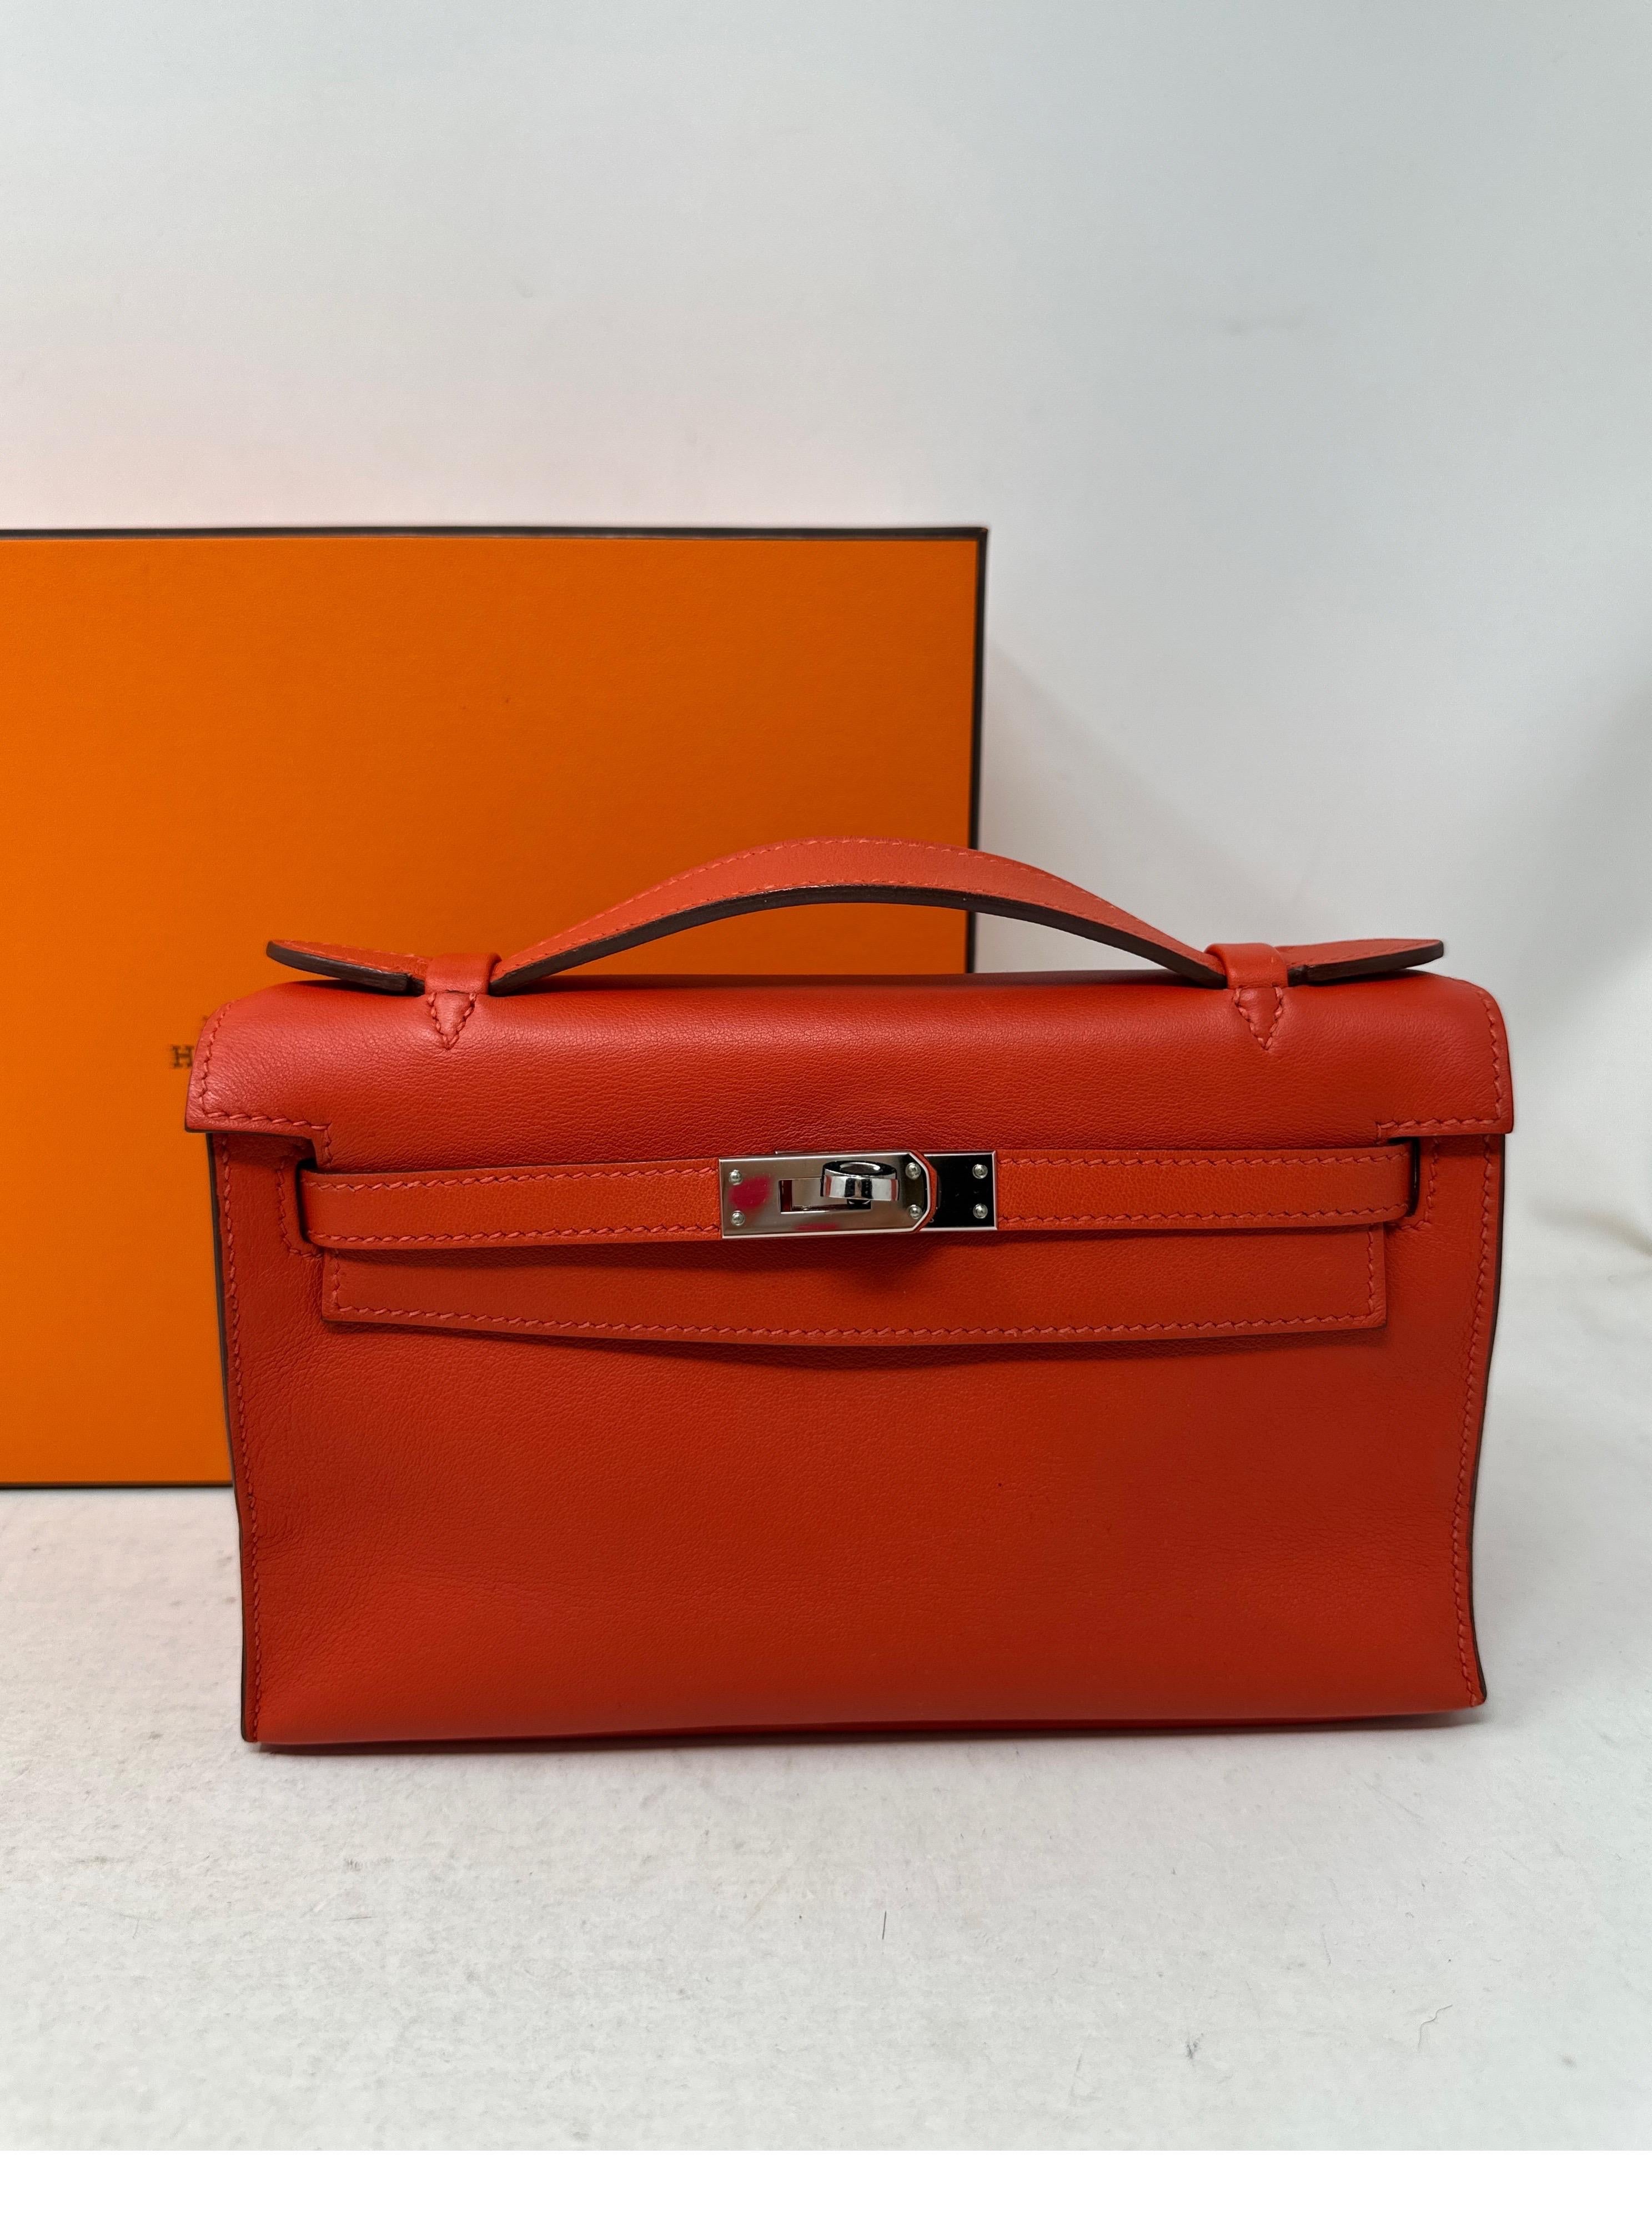 Hermes Orange Kelly Pochette. Palladium silver hardware. Swift leather. Rare pochette bag. Excellent condition. Interior clean. Great investment bag. Don't miss out. 